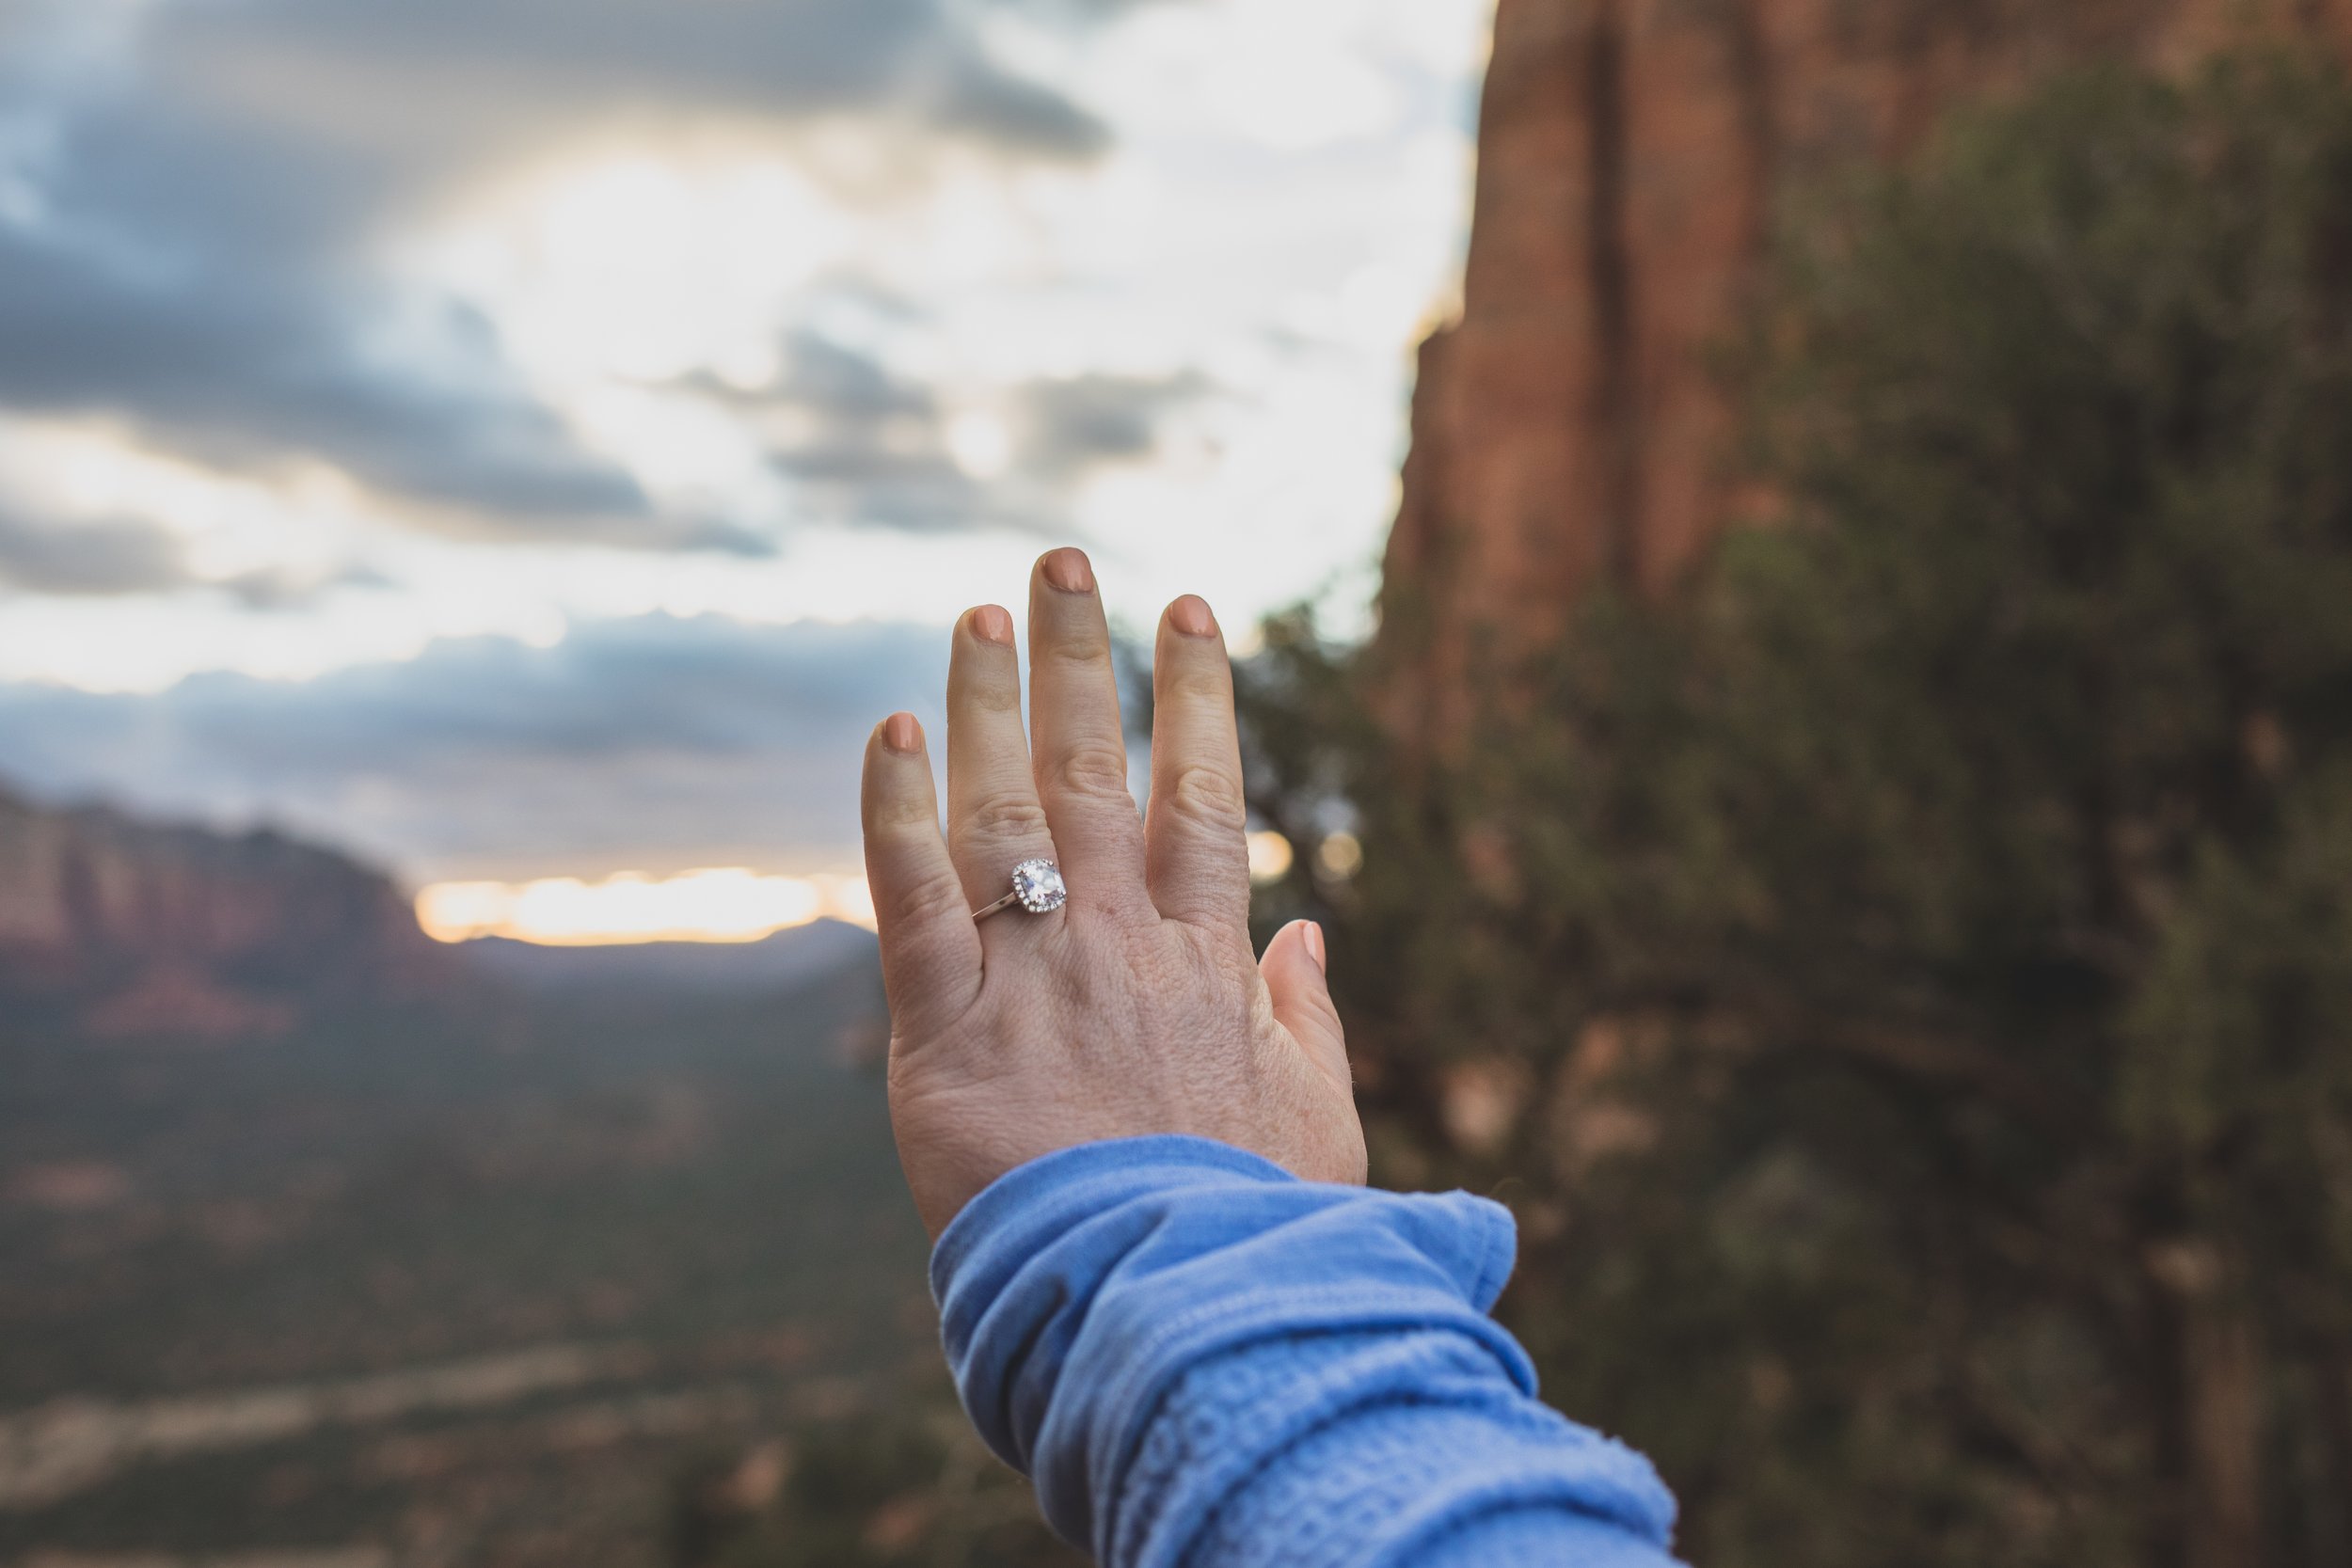  Engagement Ring detail at a Sunrise Proposal at Cathedral Rock in Sedona by Arizona Photographer Jennifer Lind Schutsky  